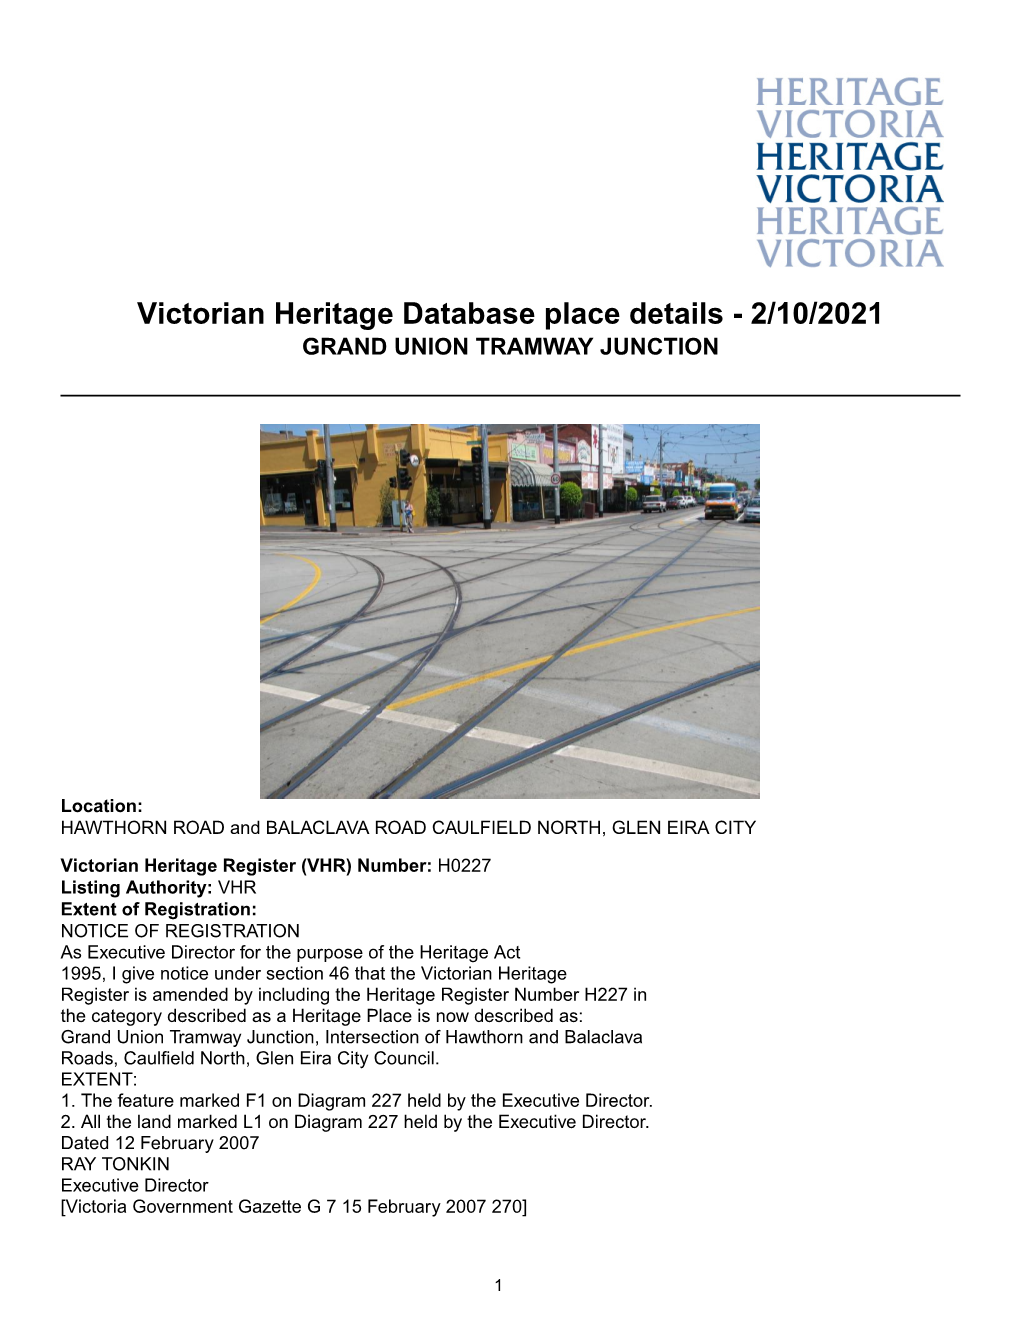 Victorian Heritage Database Place Details - 2/10/2021 GRAND UNION TRAMWAY JUNCTION